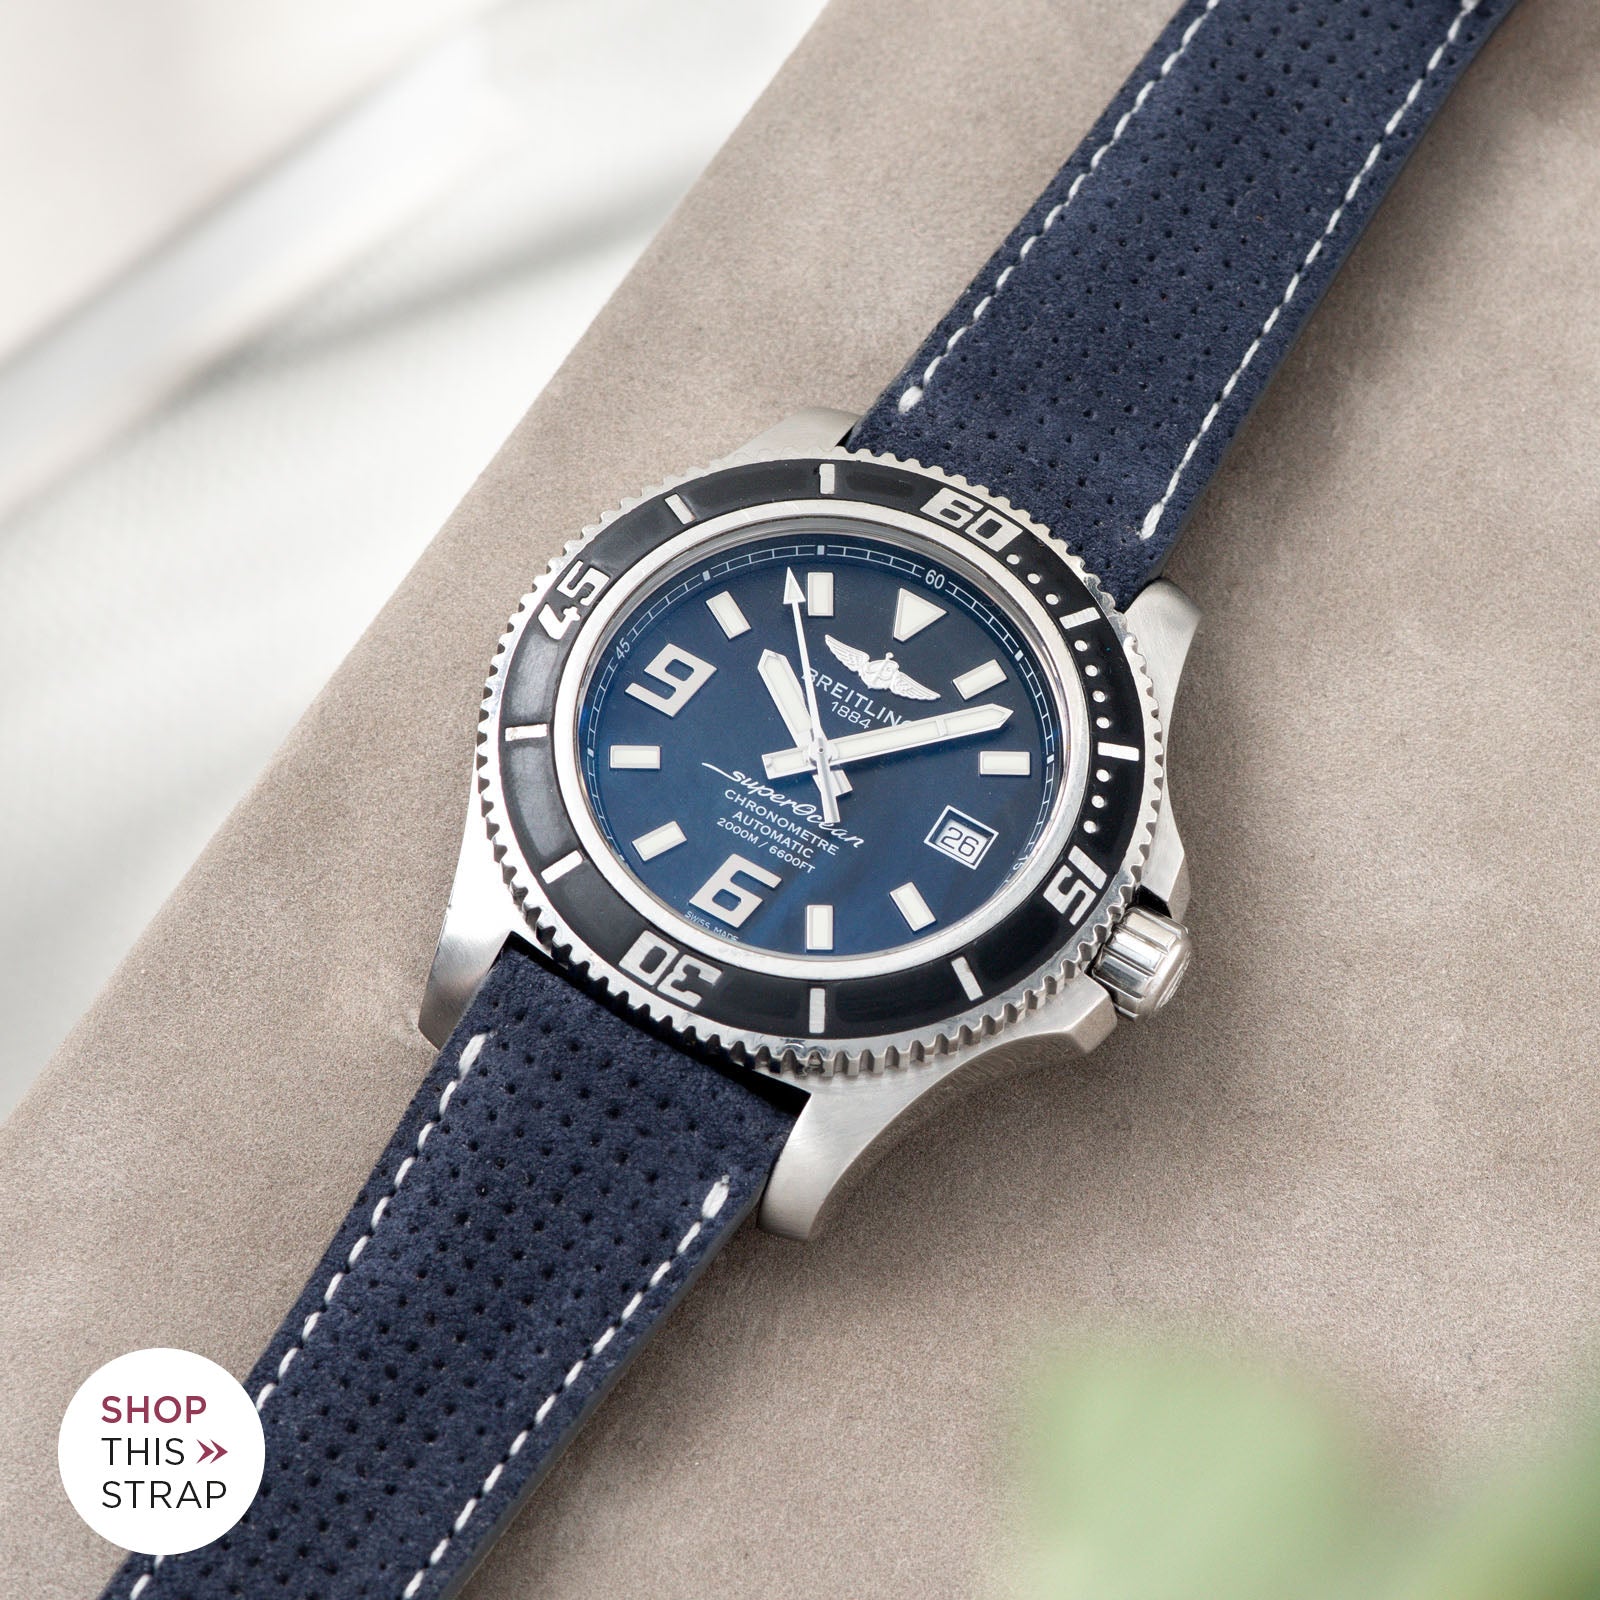 Bulang and Sons_Strap Guide_Breitling Superocean 44_Punched Blue Silky Suede Leather Watch Strap